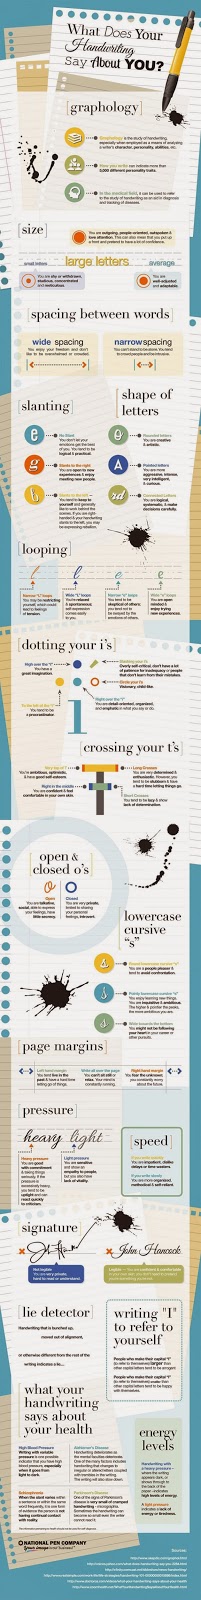 What Does Your Handwriting Say About You Infographic